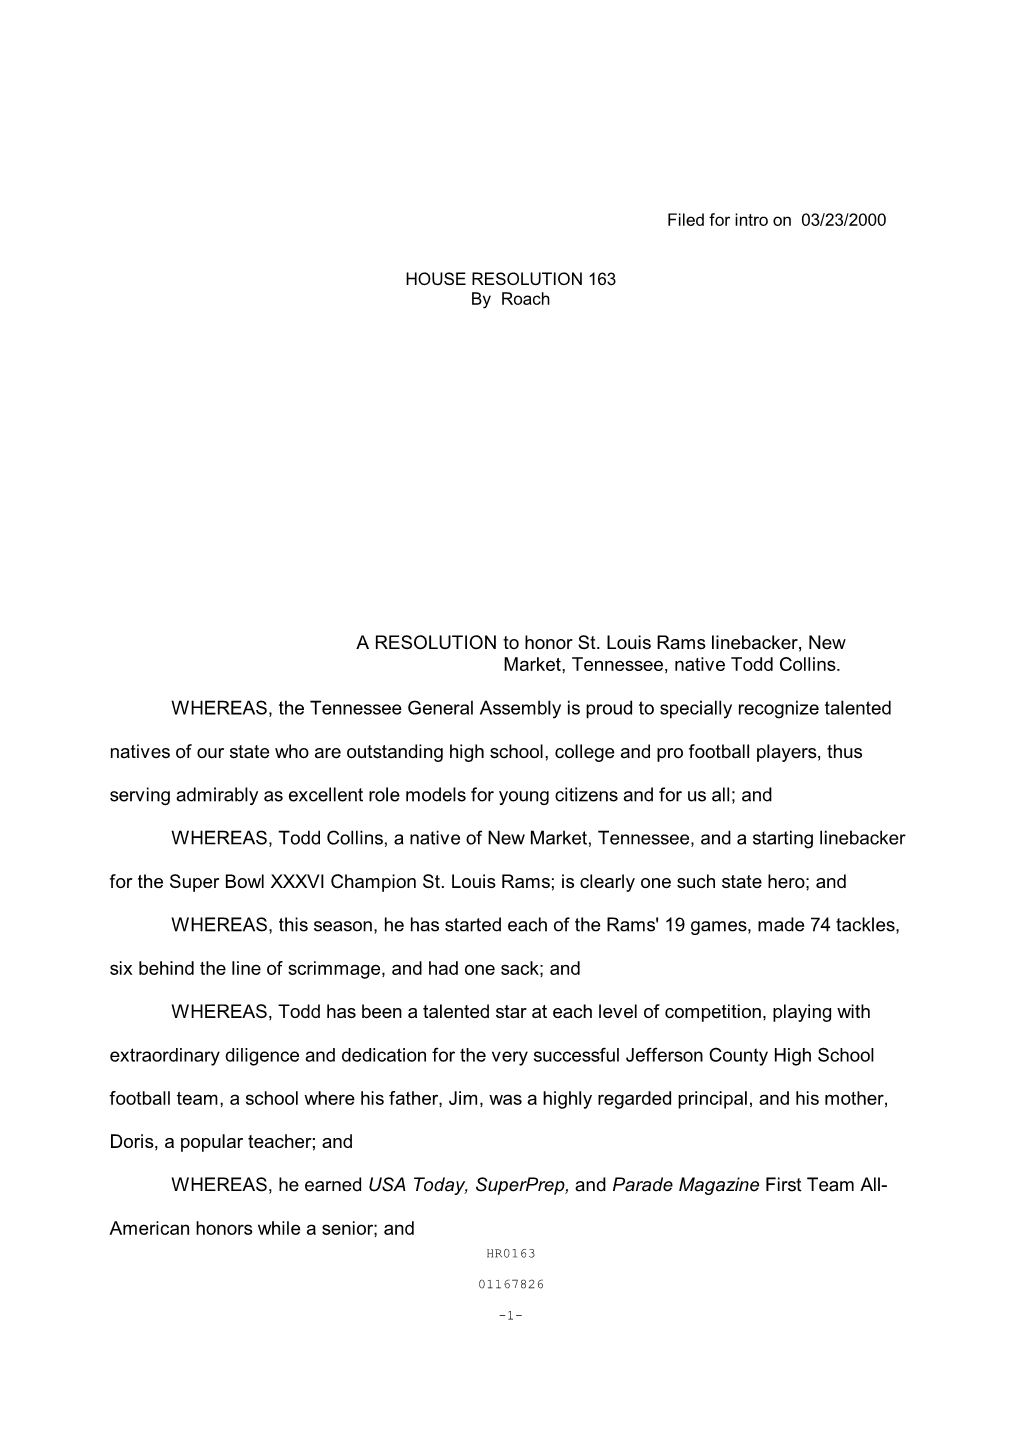 A RESOLUTION to Honor St. Louis Rams Linebacker, New Market, Tennessee, Native Todd Collins